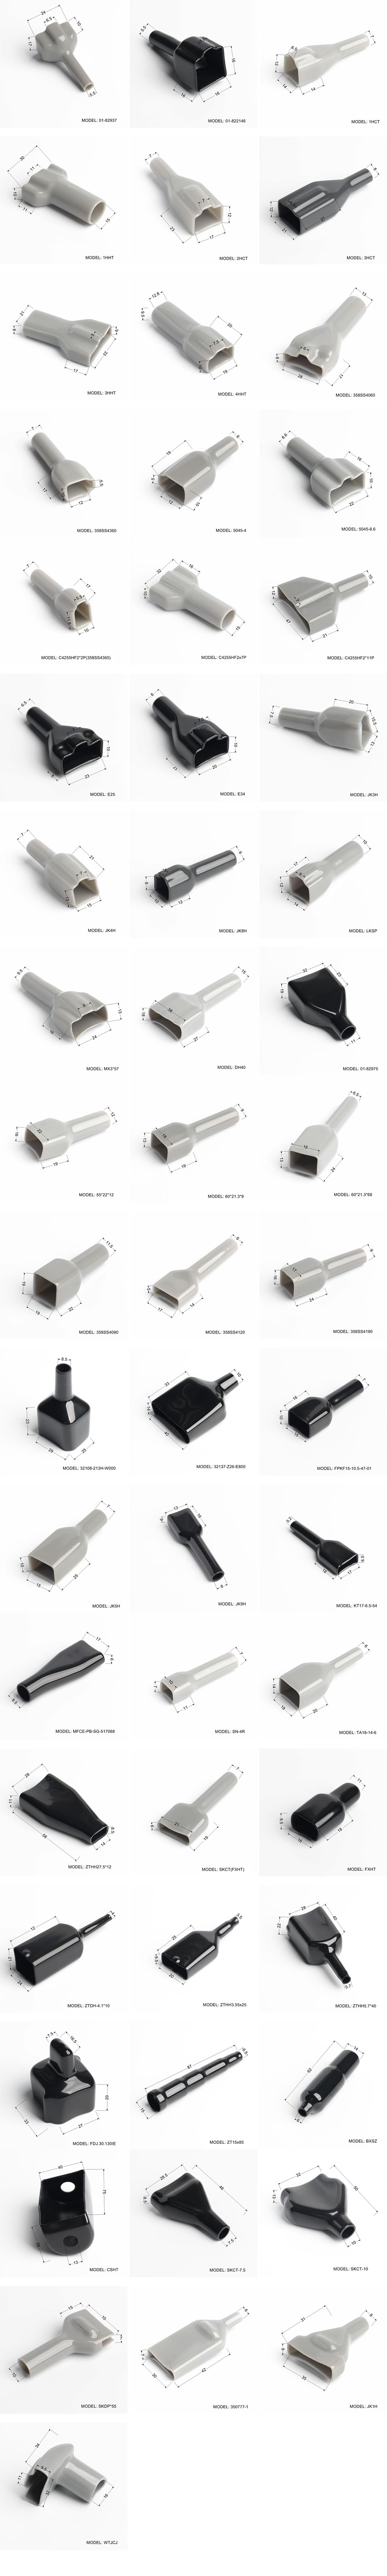 Molex Connector Cover,electrical connector cover, harness connector cover, pvc connector cover, connector covers